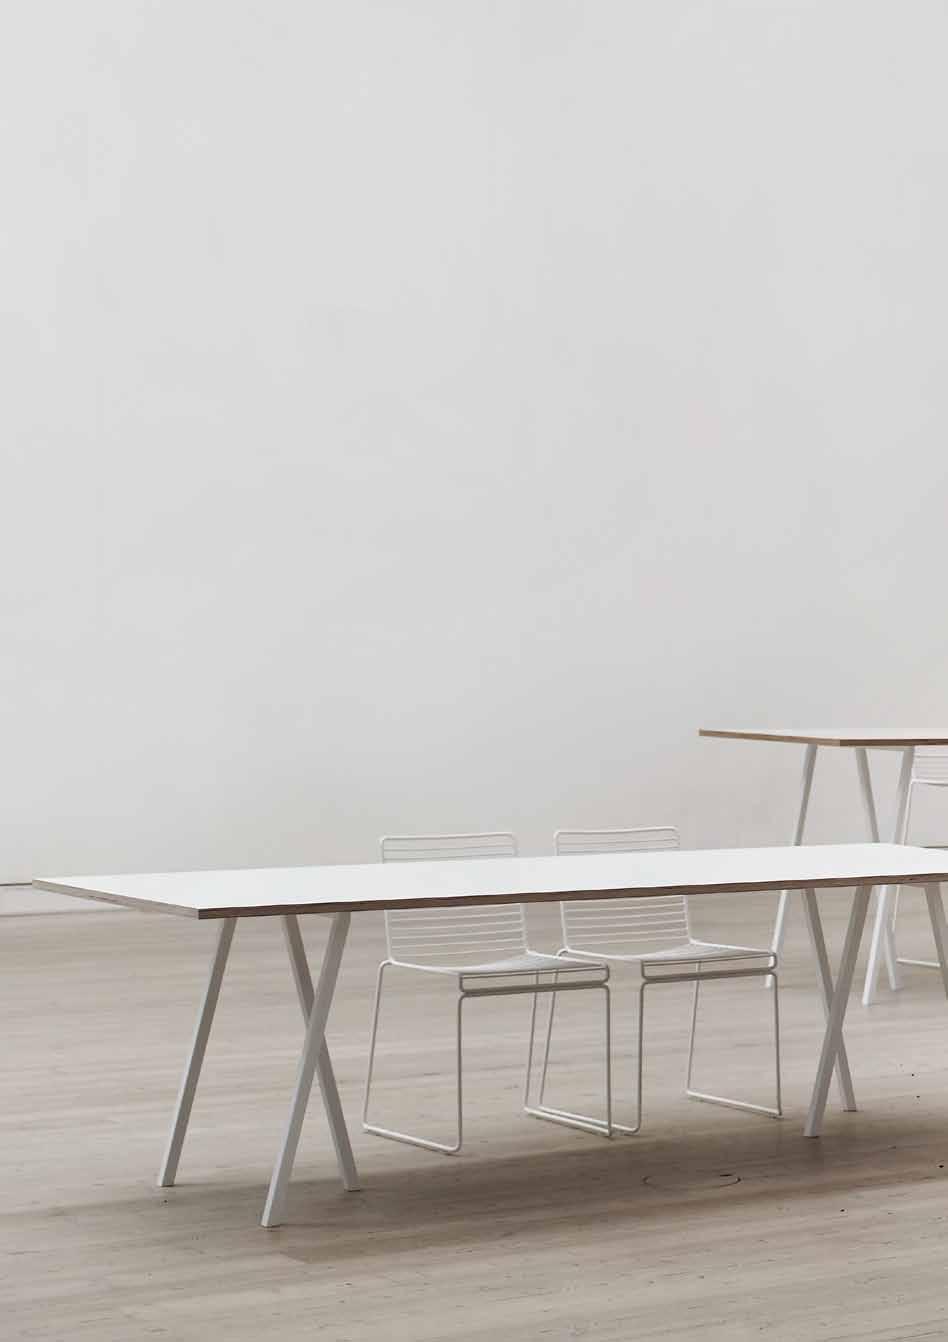 TABLE/ LOOP STAND LOOP STAND ROUND DESIGN BY LEIF